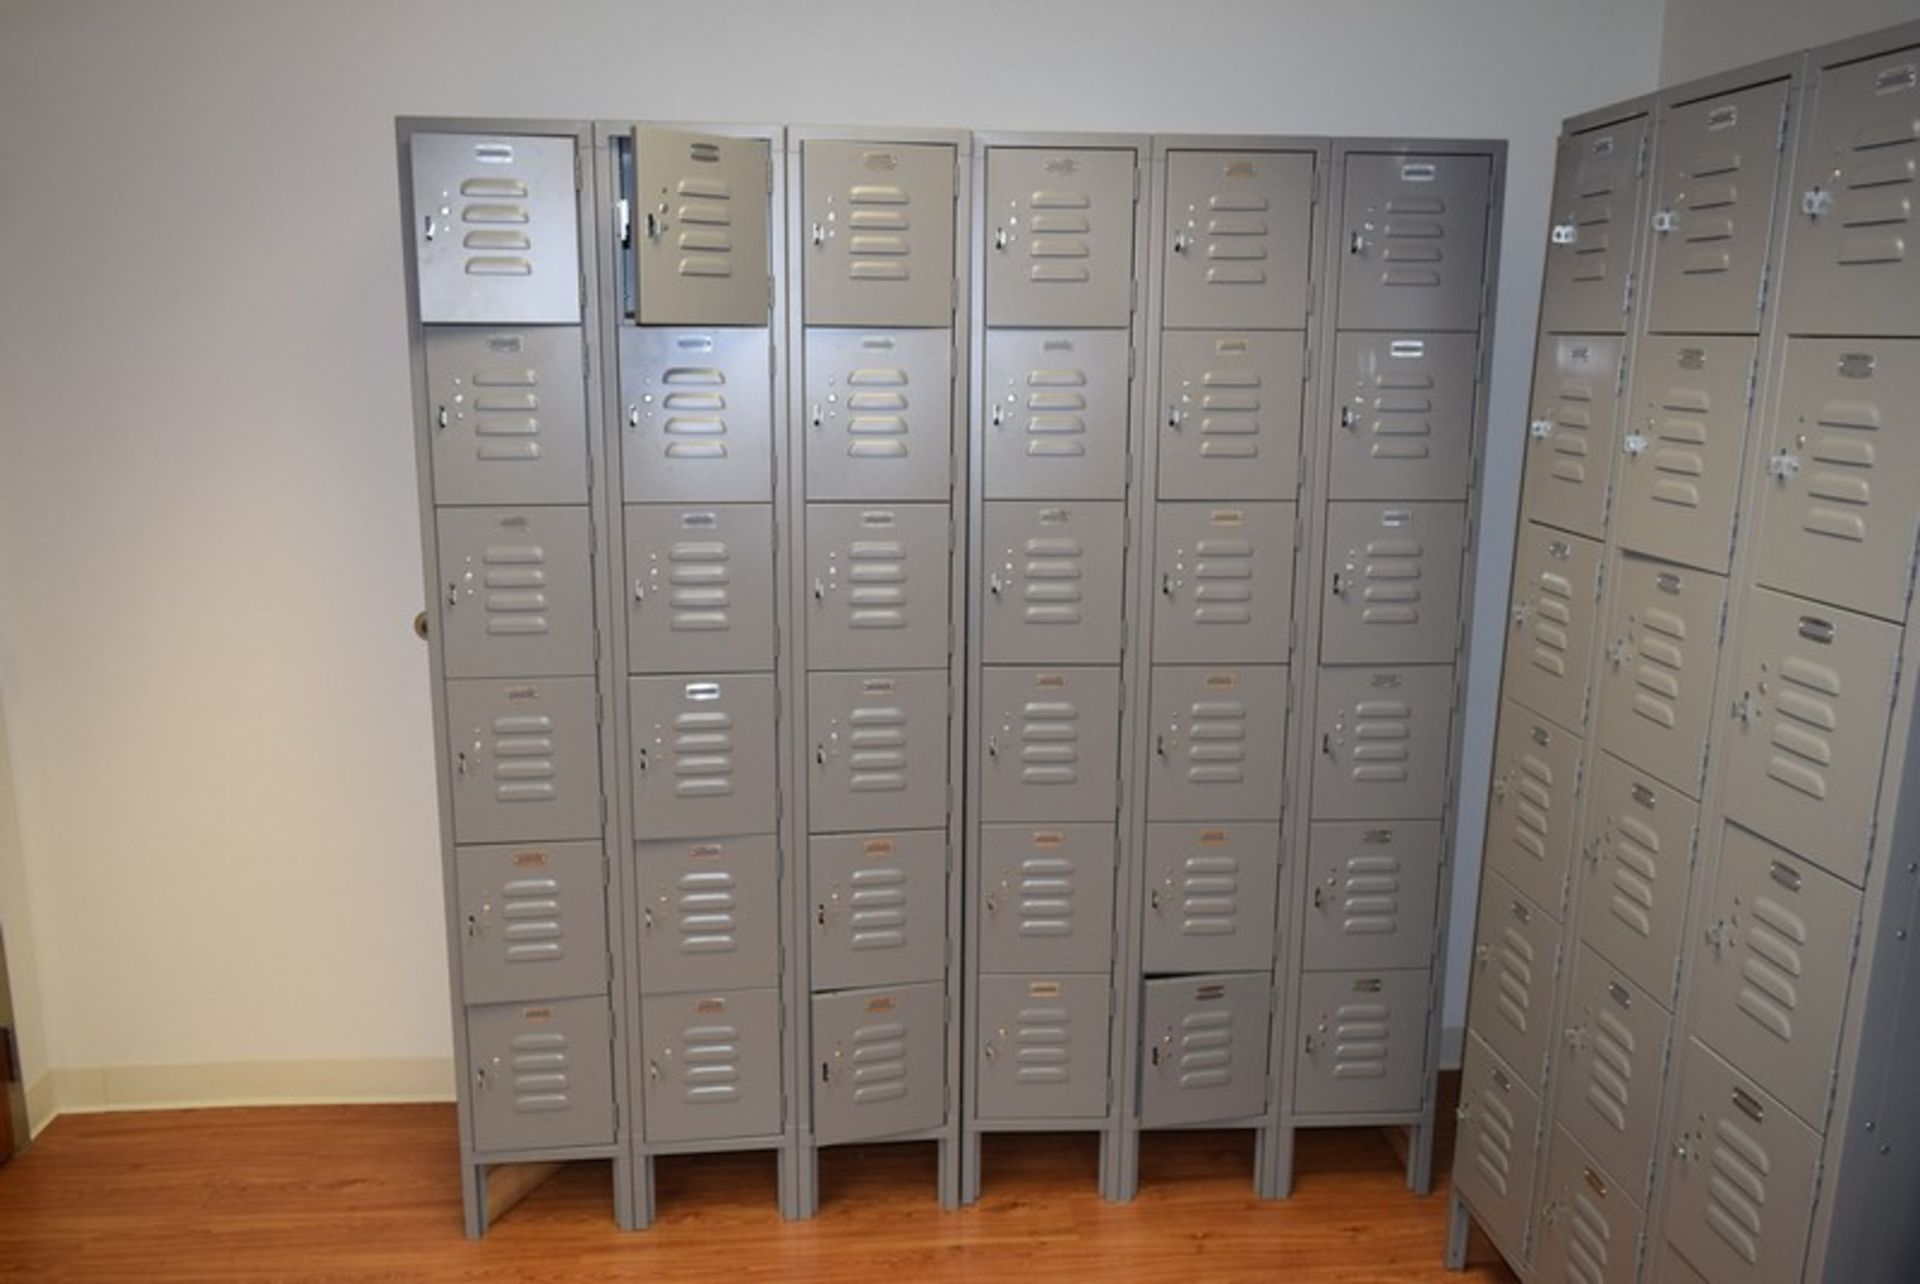 LOT: (4) SECTIONS SALSBURY 18 SECTION METAL MINI LOCKERS